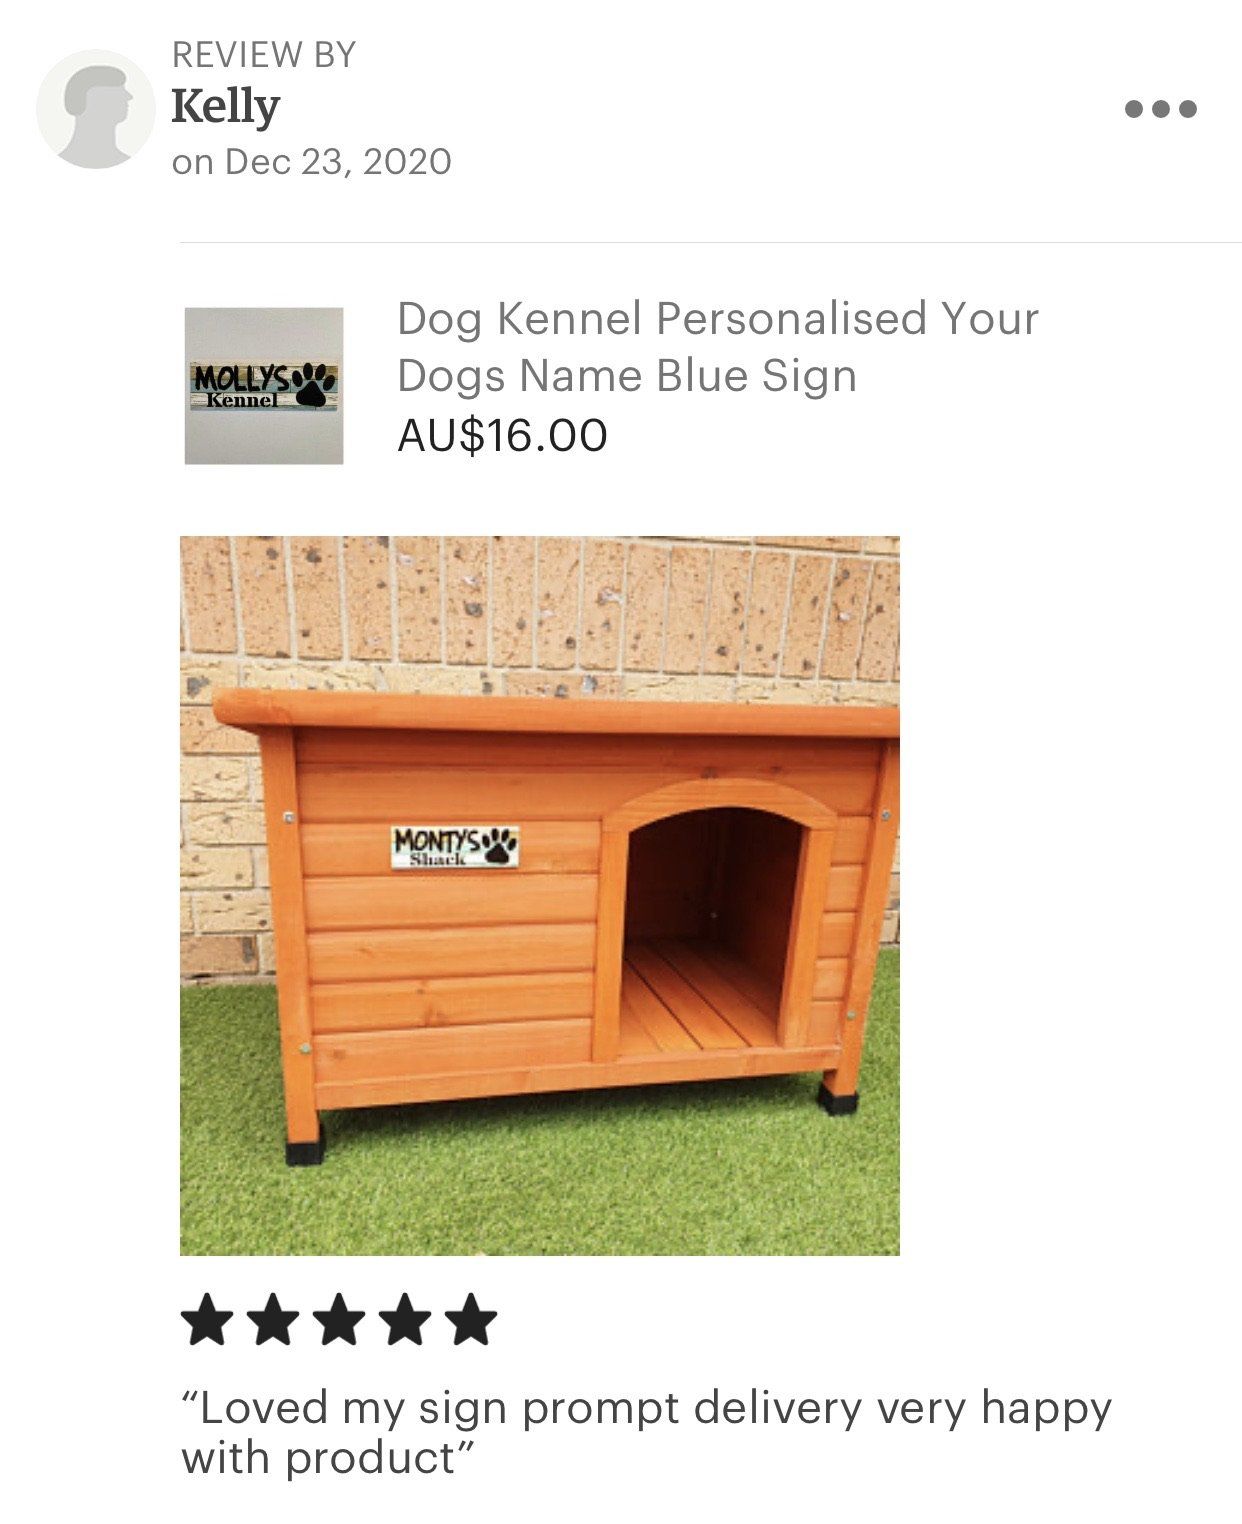 Dog Kennel Personalised Your Dogs Name Blue Sign